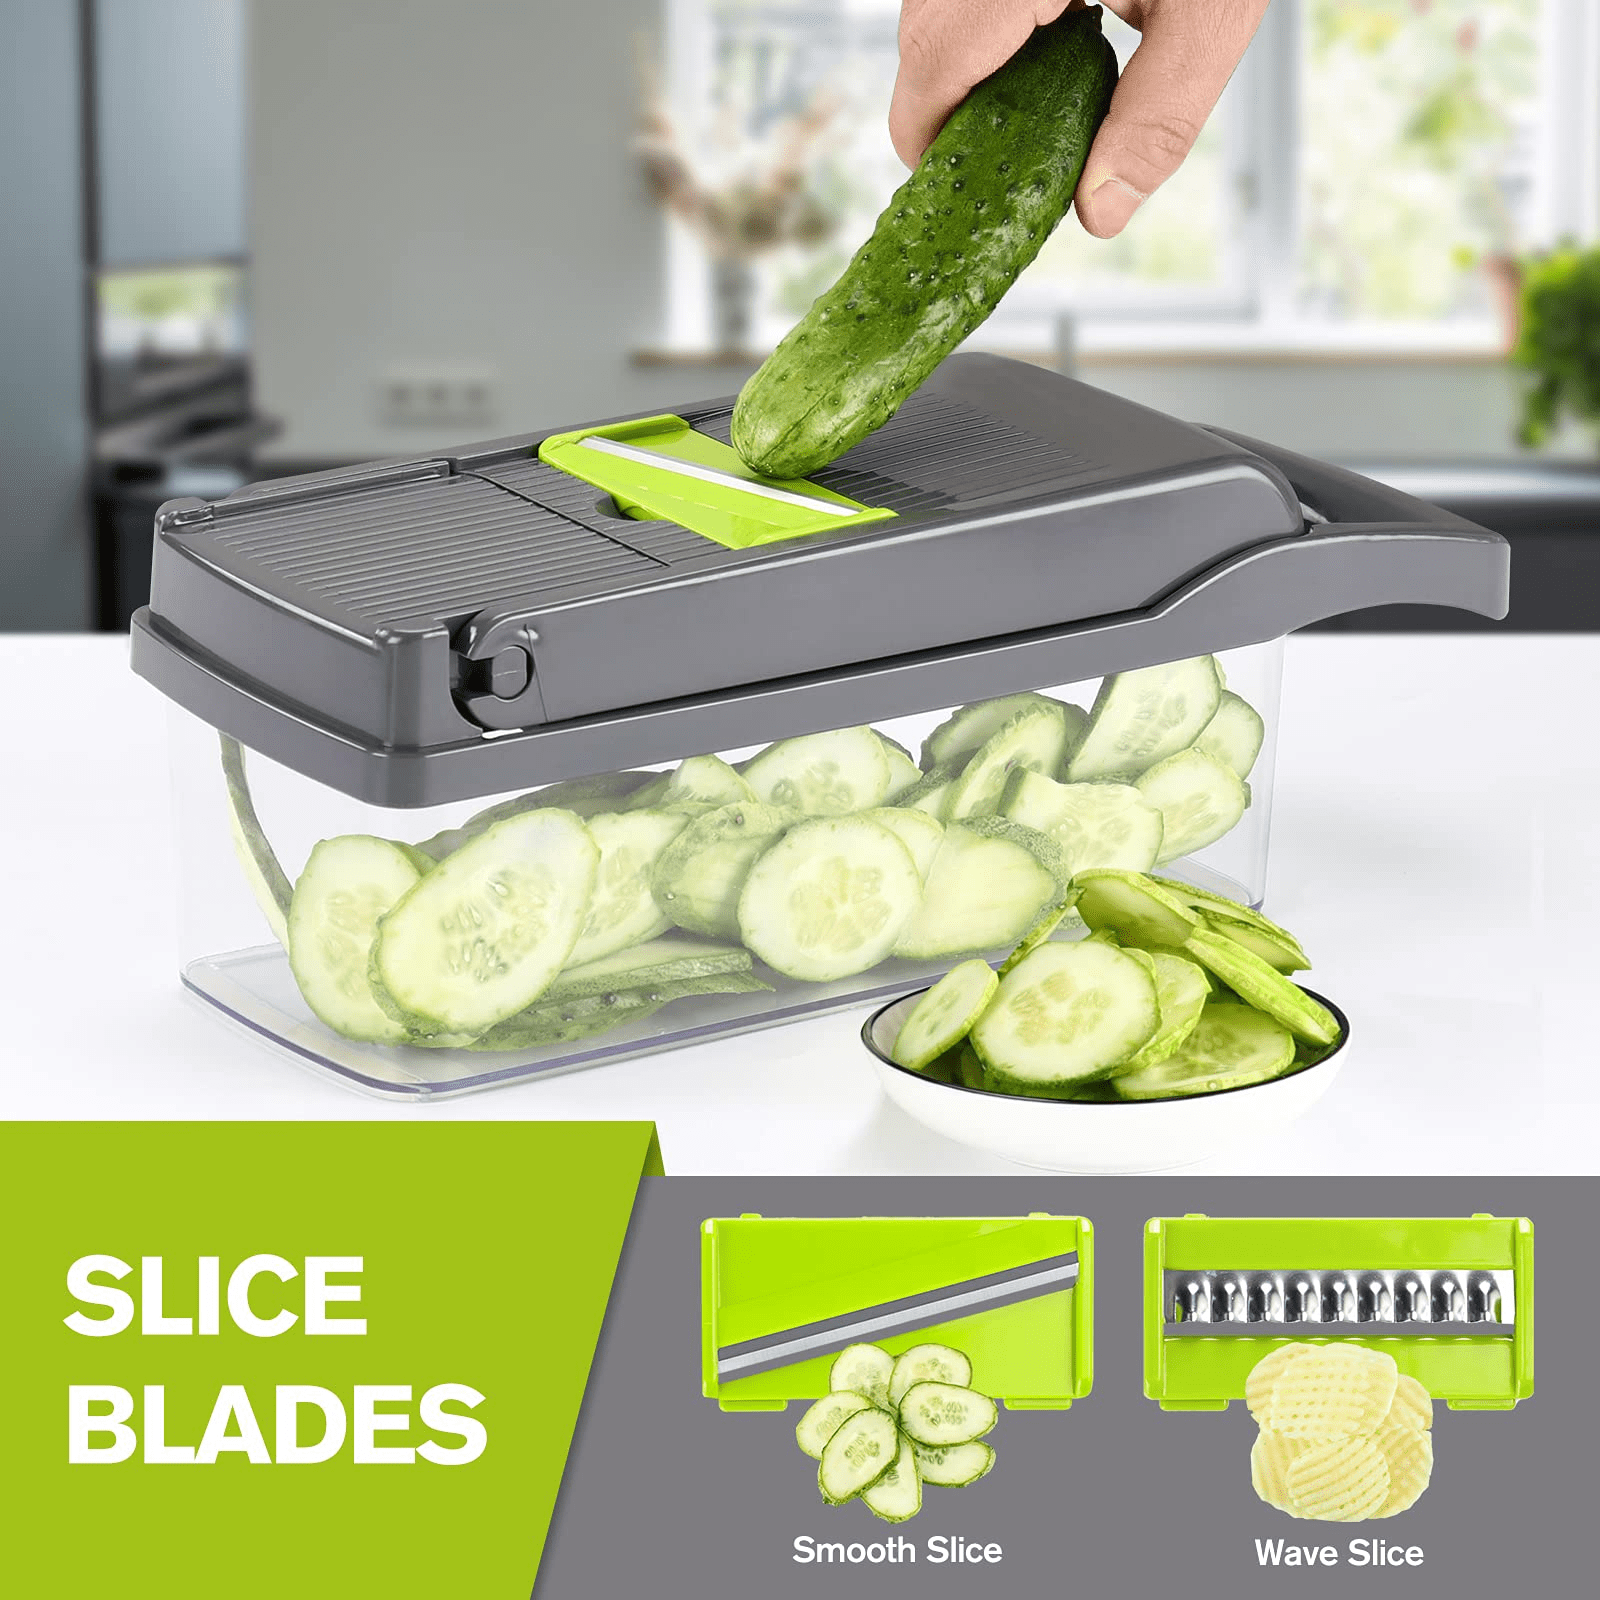 12 In 1 Multi-Function Food Vegetable Chopper Kitchen Assistant Tool  Mandoline Slicer Carrots Potatoes Manually Cut Shred Cutter